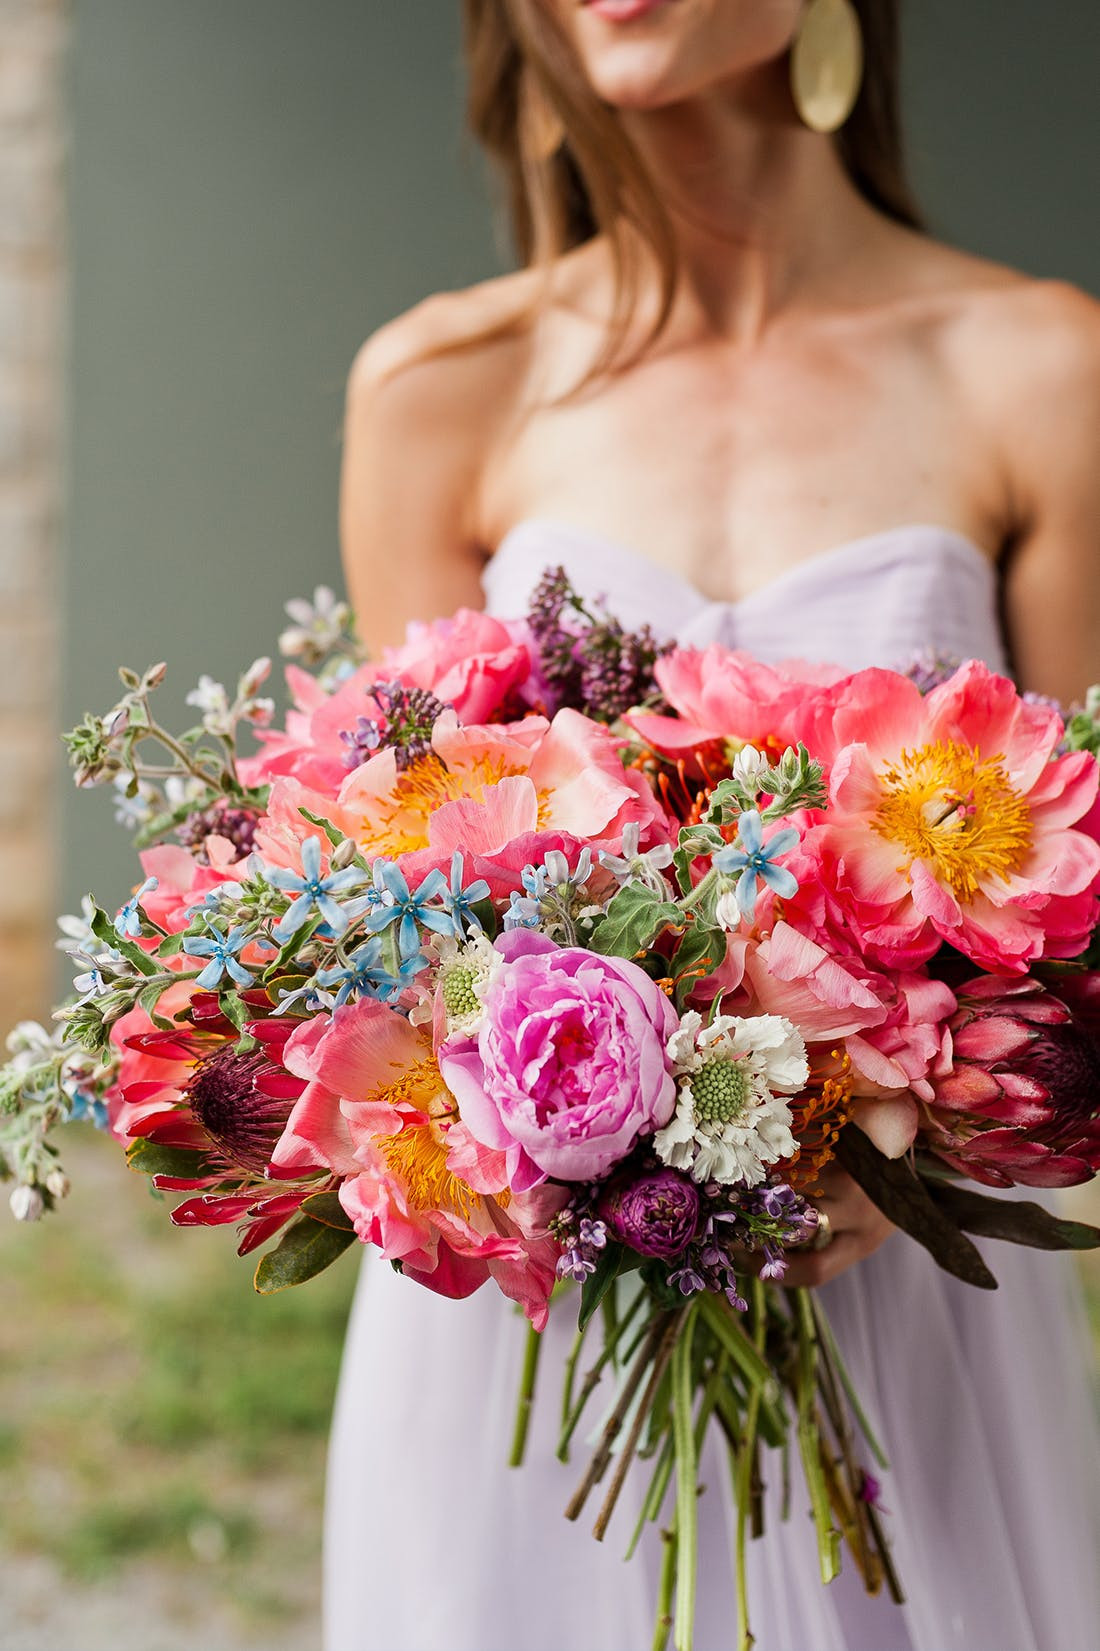 DIY Wedding Flowers
 Check Out This Stunning Wedding Bouquet You Can DIY